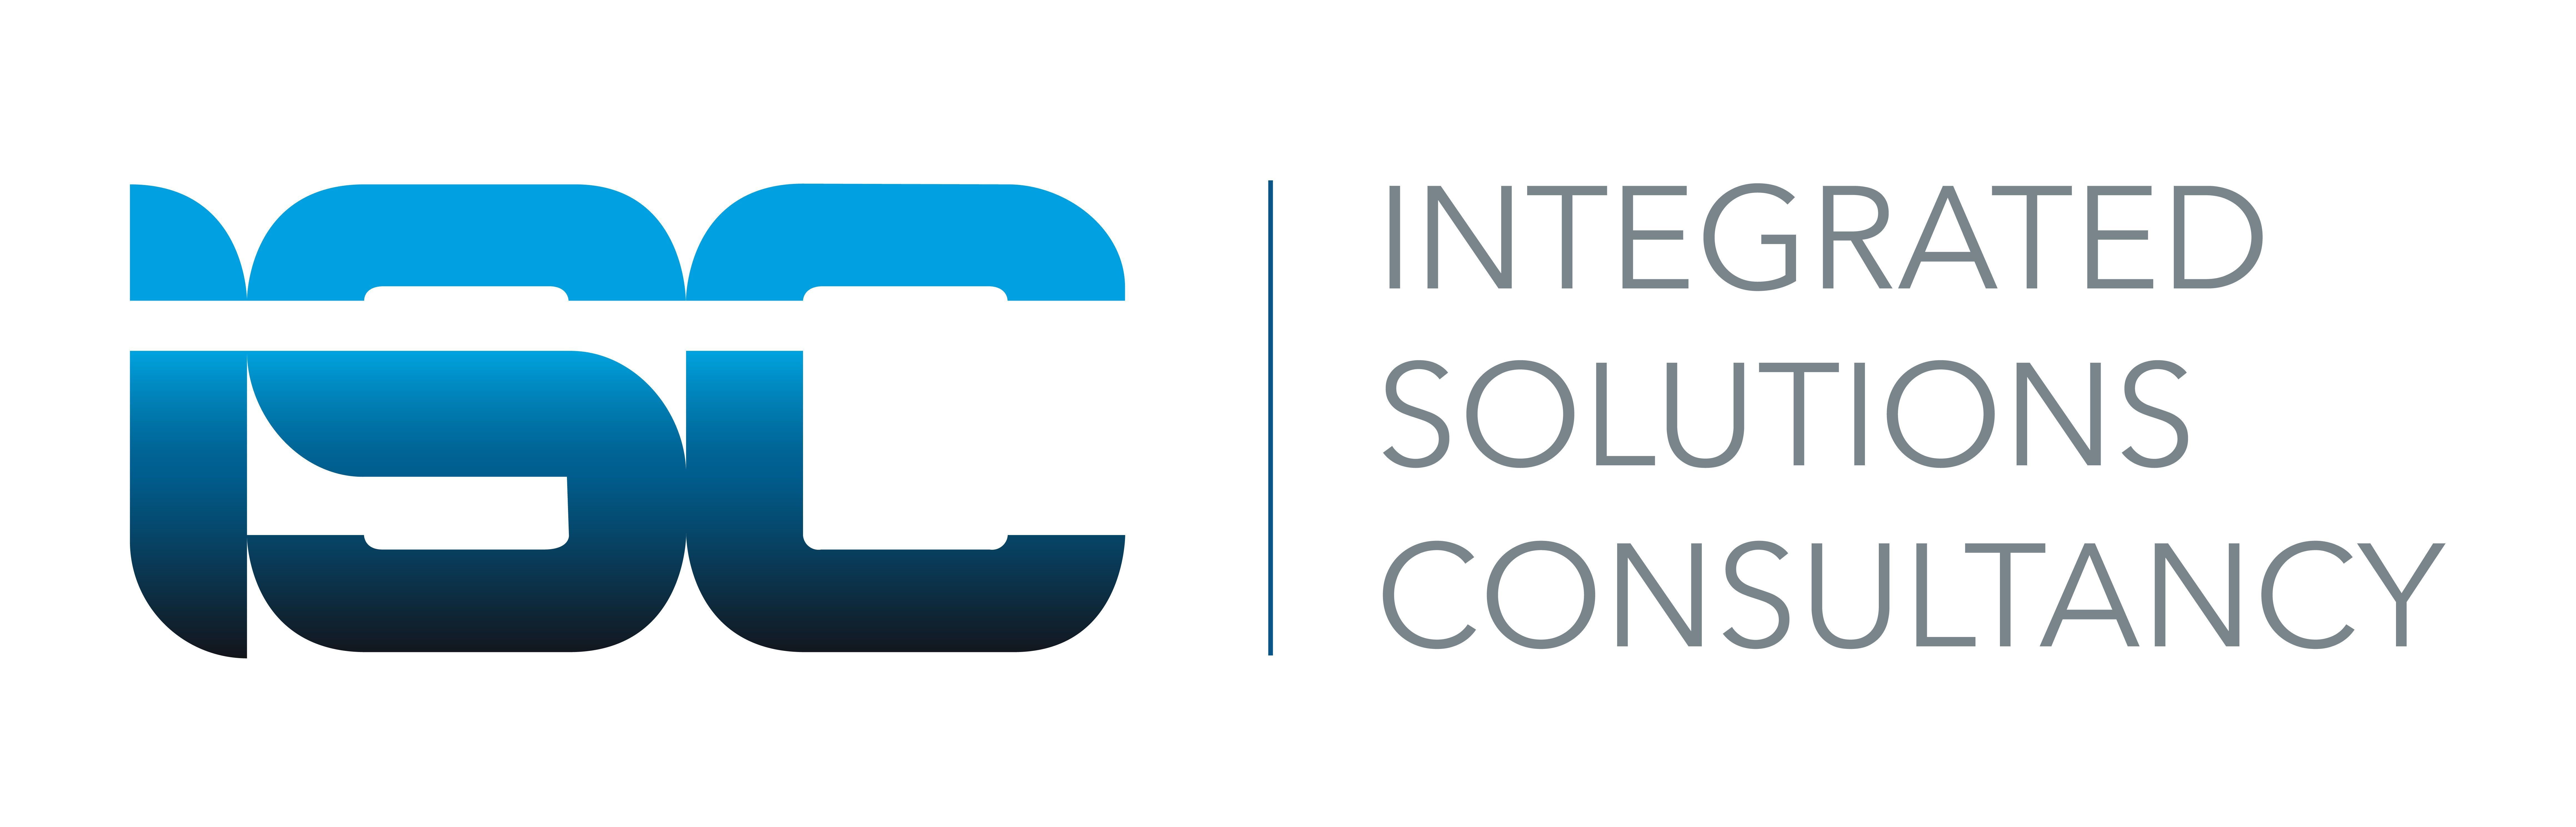 Integrated Solutions Consultancy (ISC)